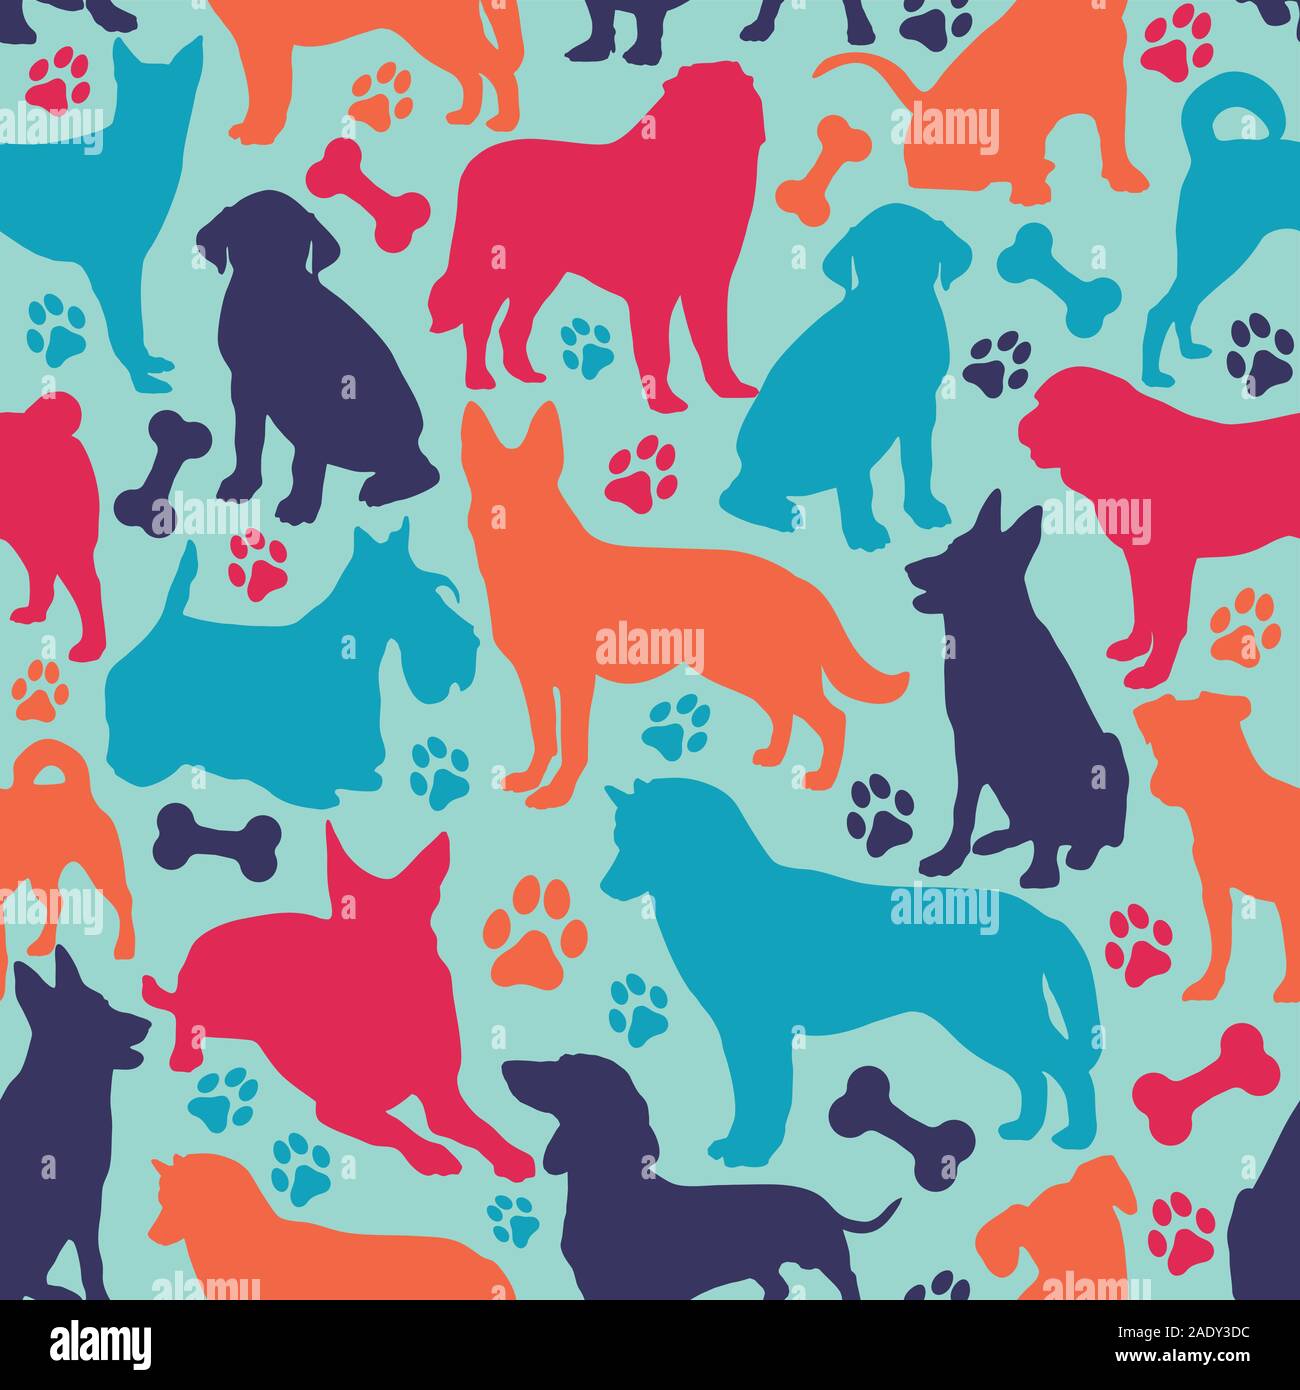 Seamless pattern with different dog breeds. Stock Vector